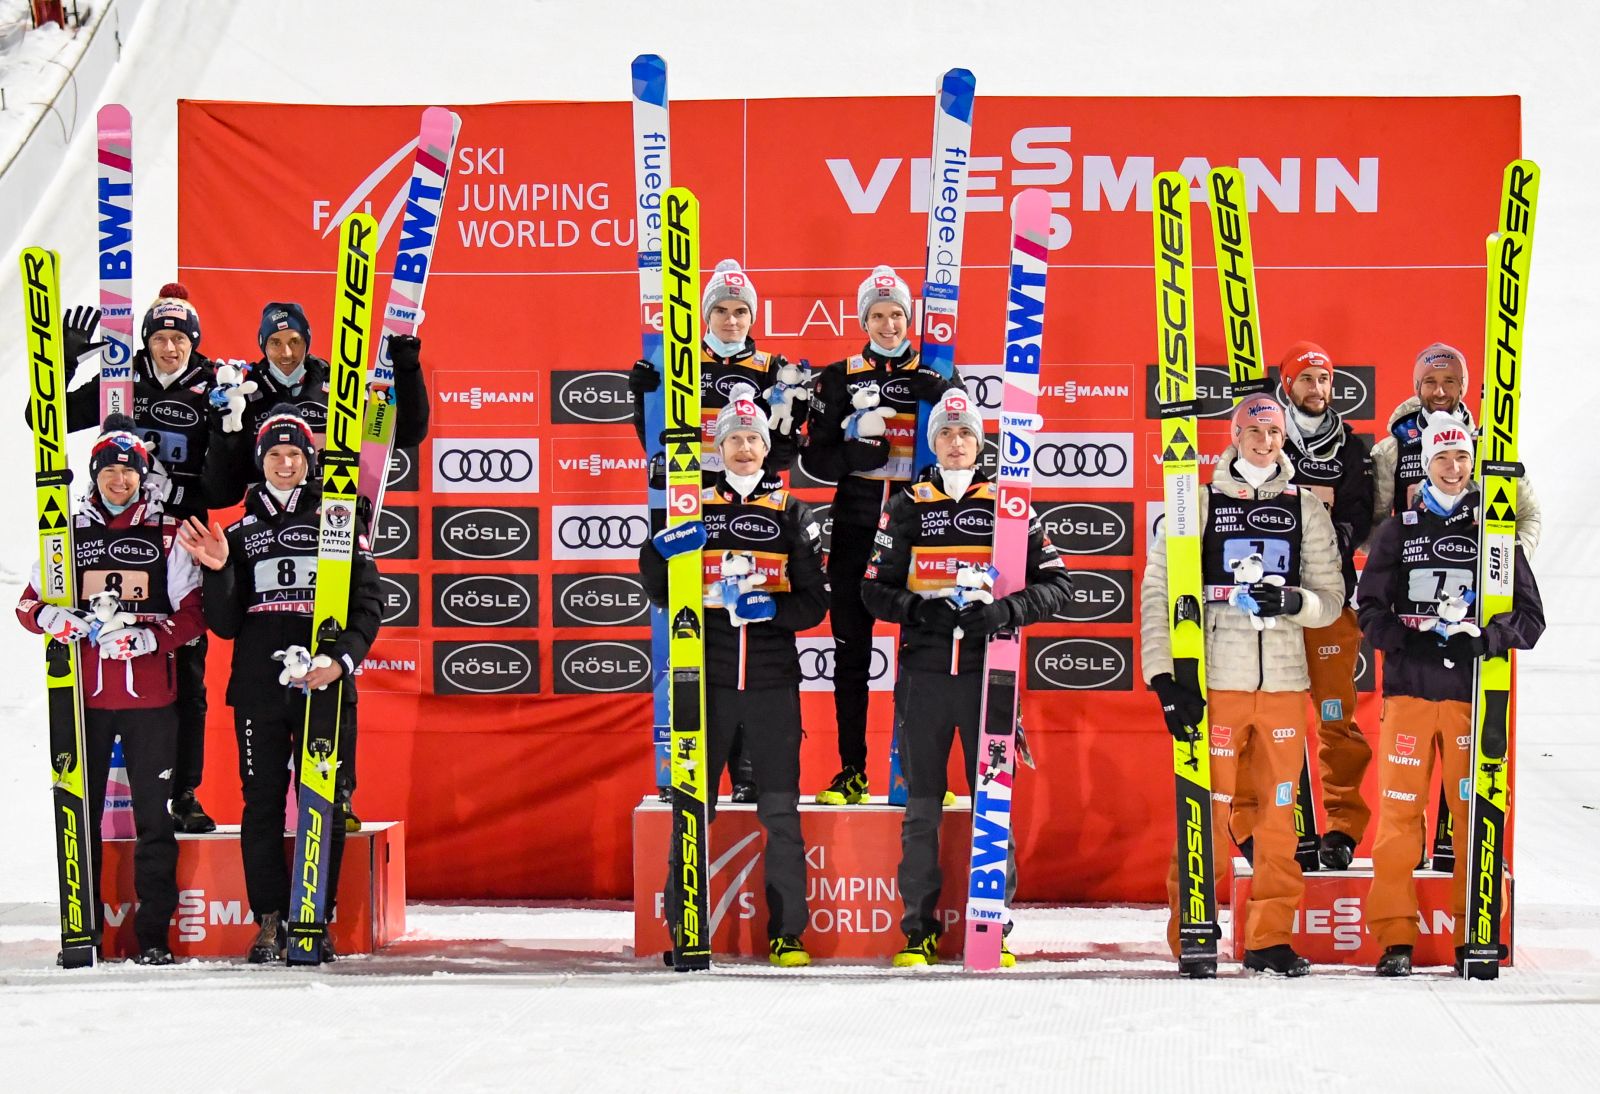 epa08960653 Second placed Team of Poland (L), winner team of Norway (C) and third placed team of Germany (R) celebrate on the podium for  the Men's Large Hill Team competition at the FIS Ski Jumping World Cup in Lahti, Finland, 23 January 2021.  EPA/KIMMO BRANDT